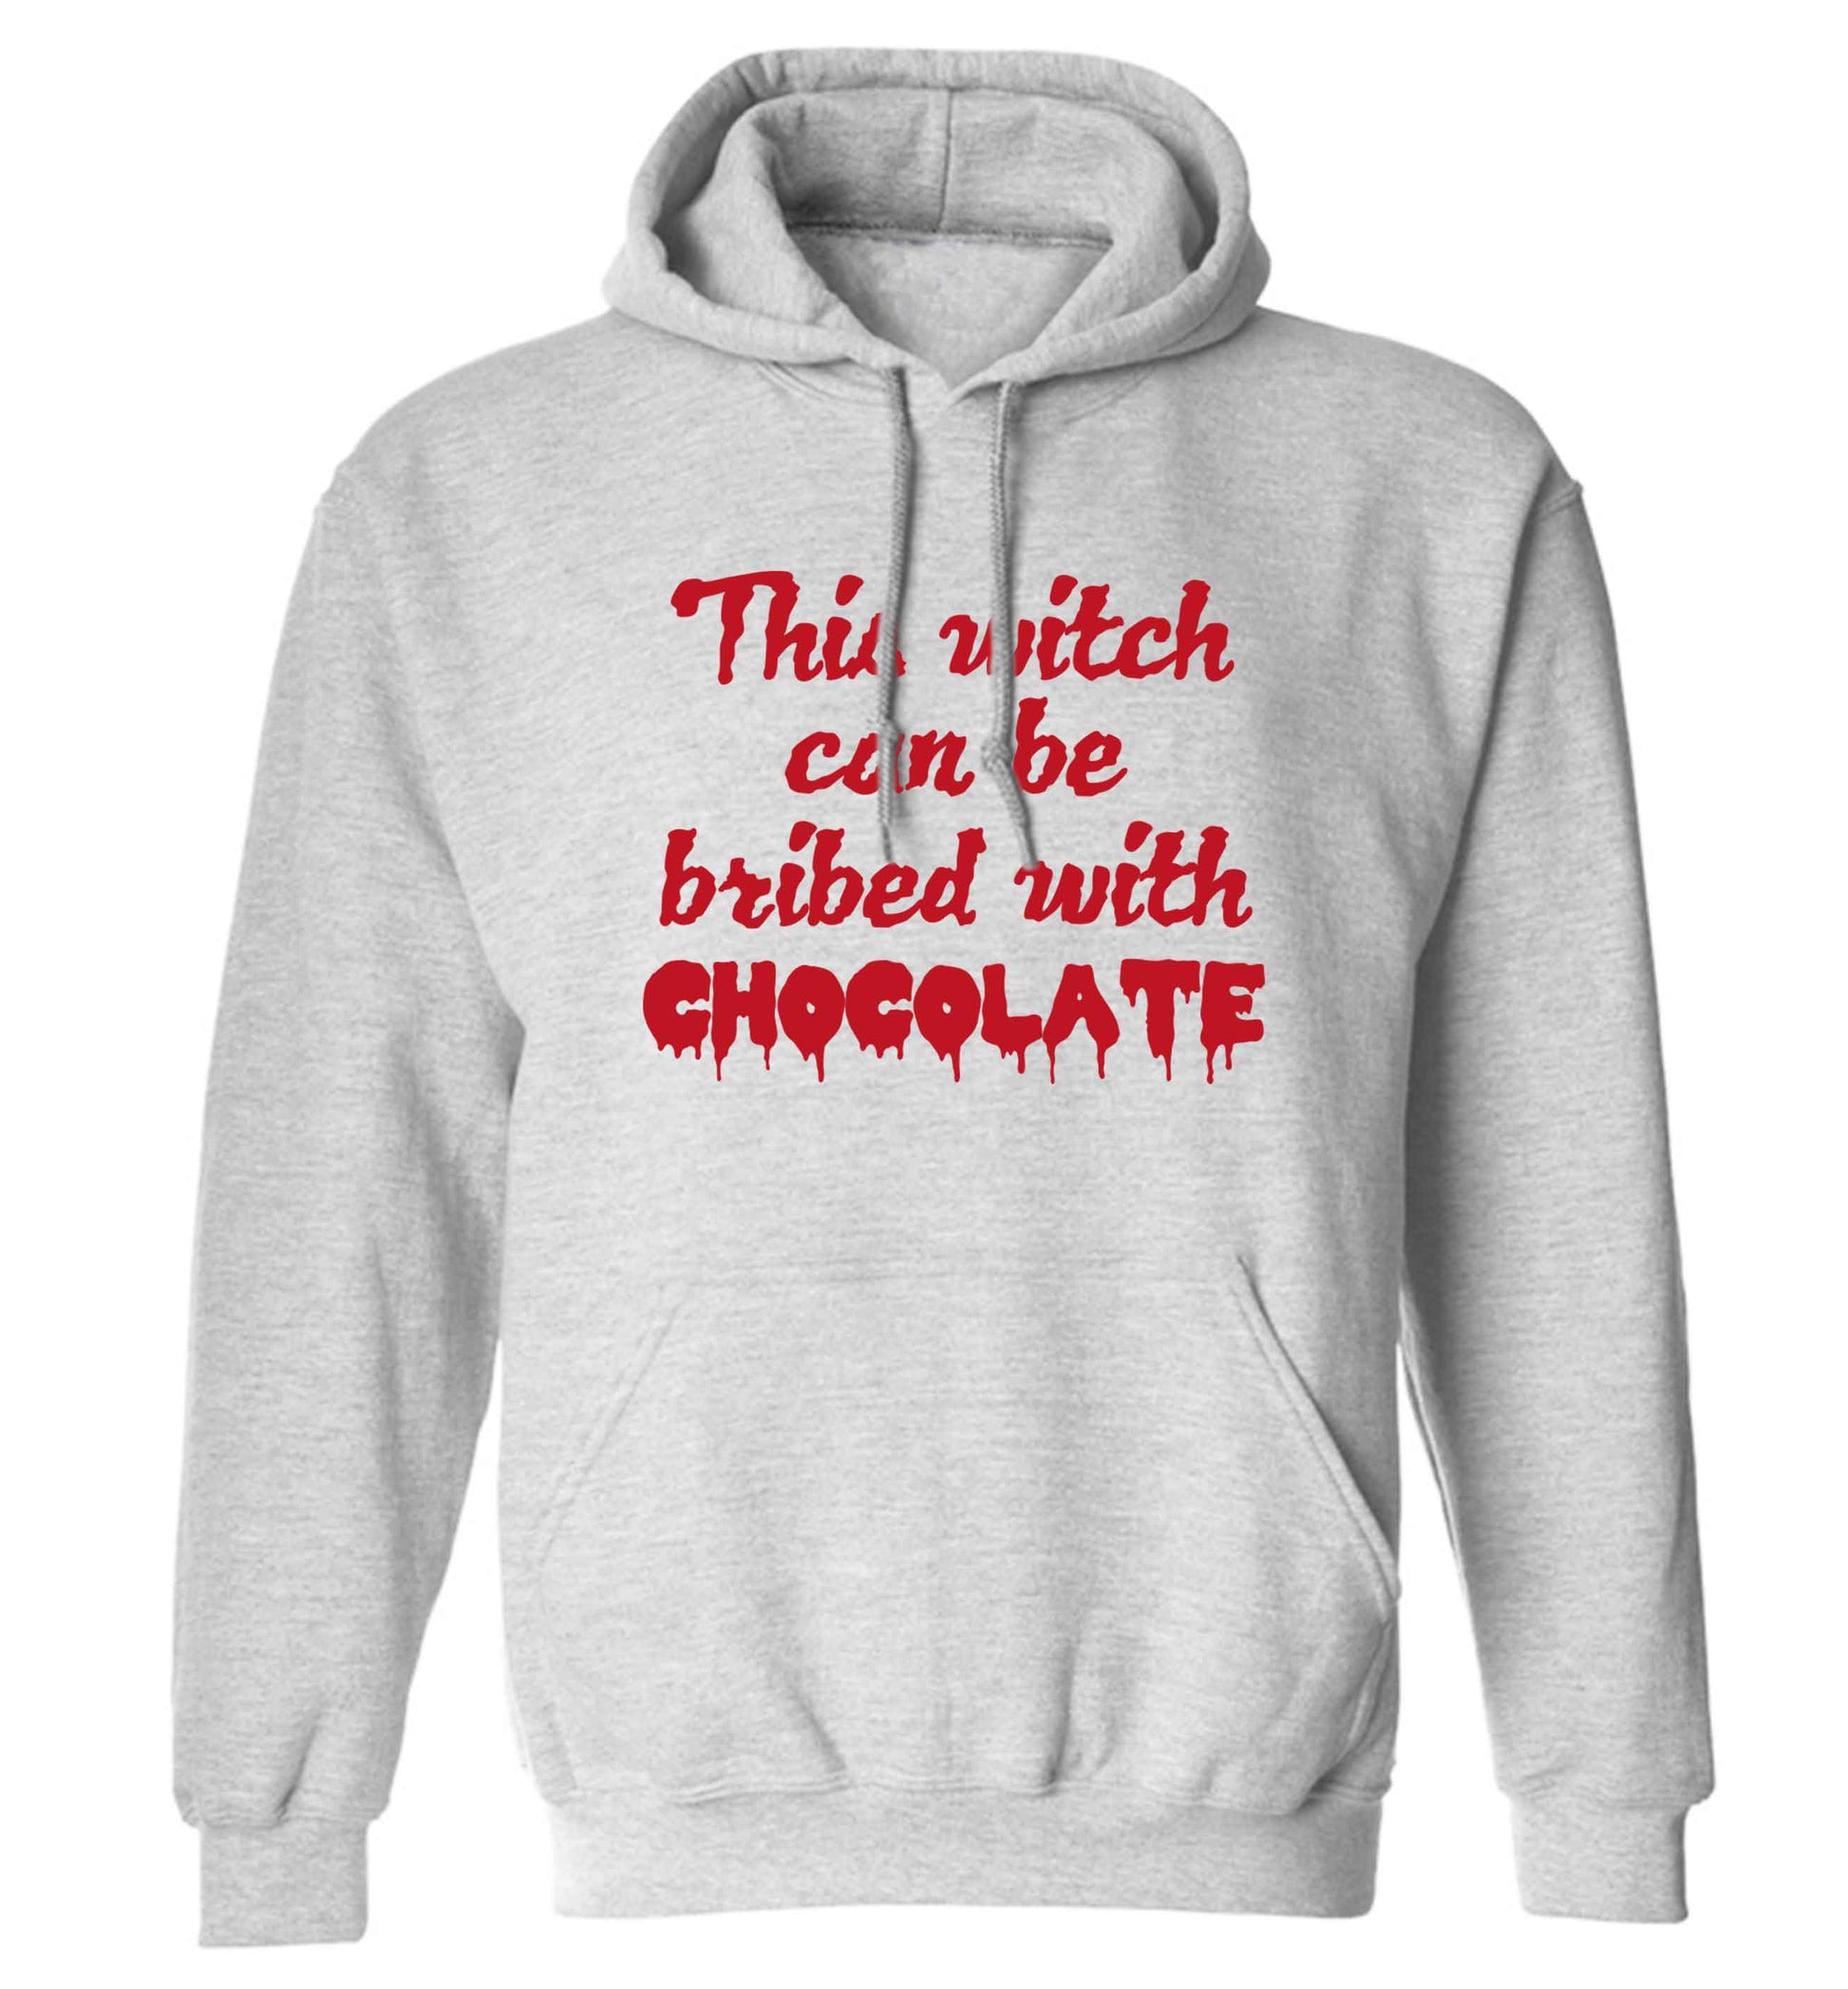 This witch can be bribed with chocolate adults unisex grey hoodie 2XL